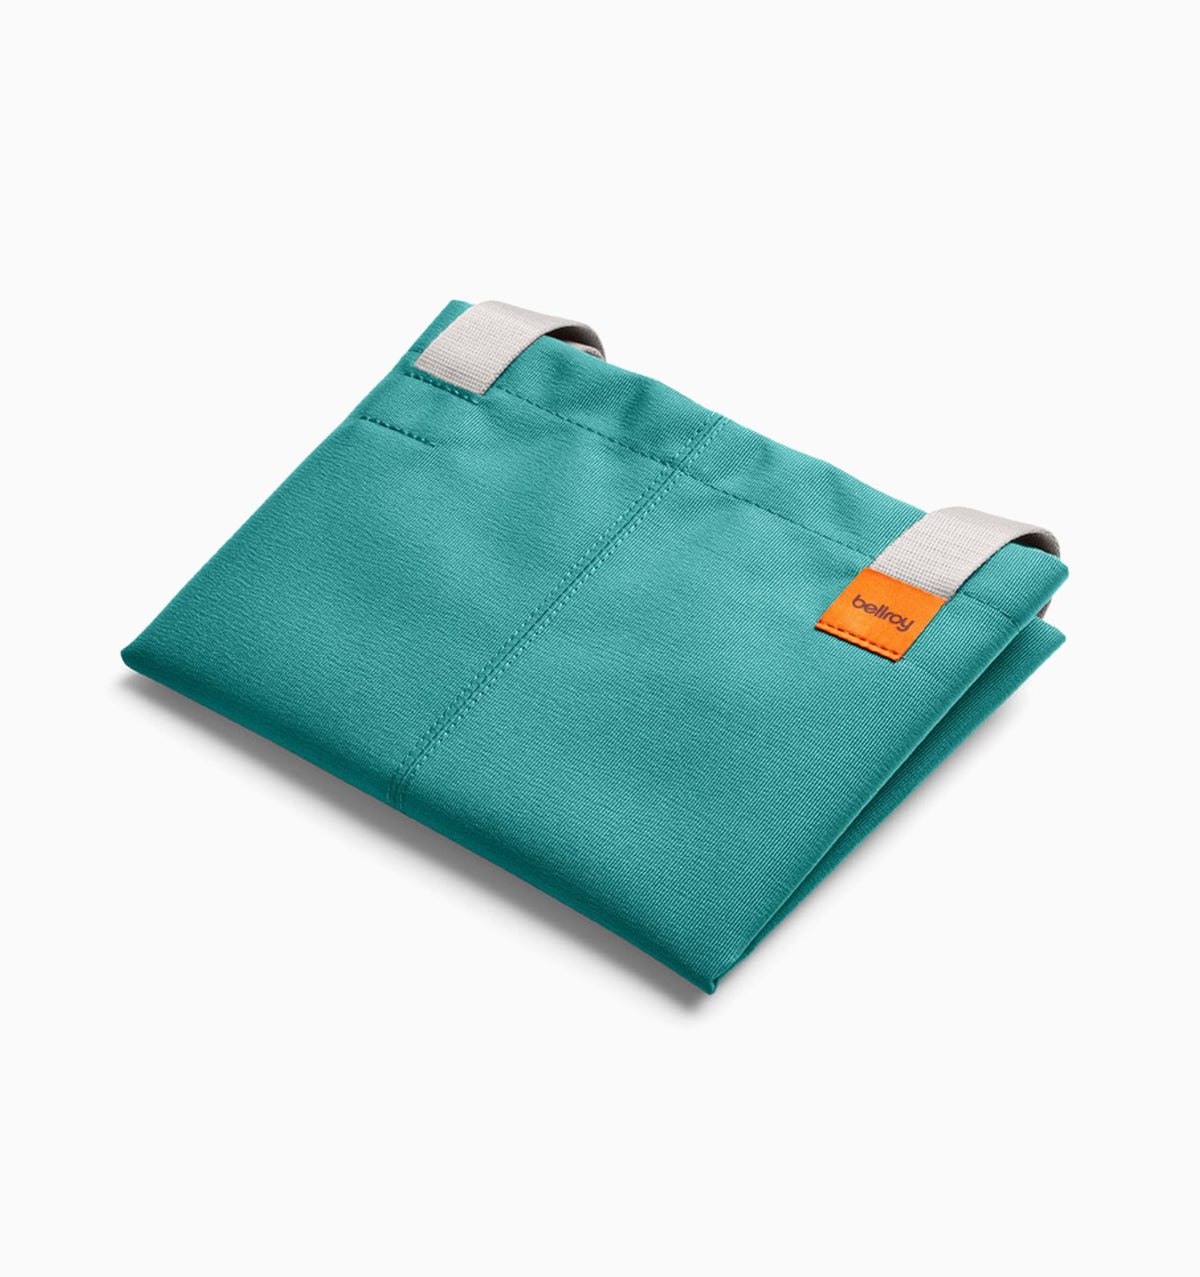 Bellroy City Tote 10L - Teal